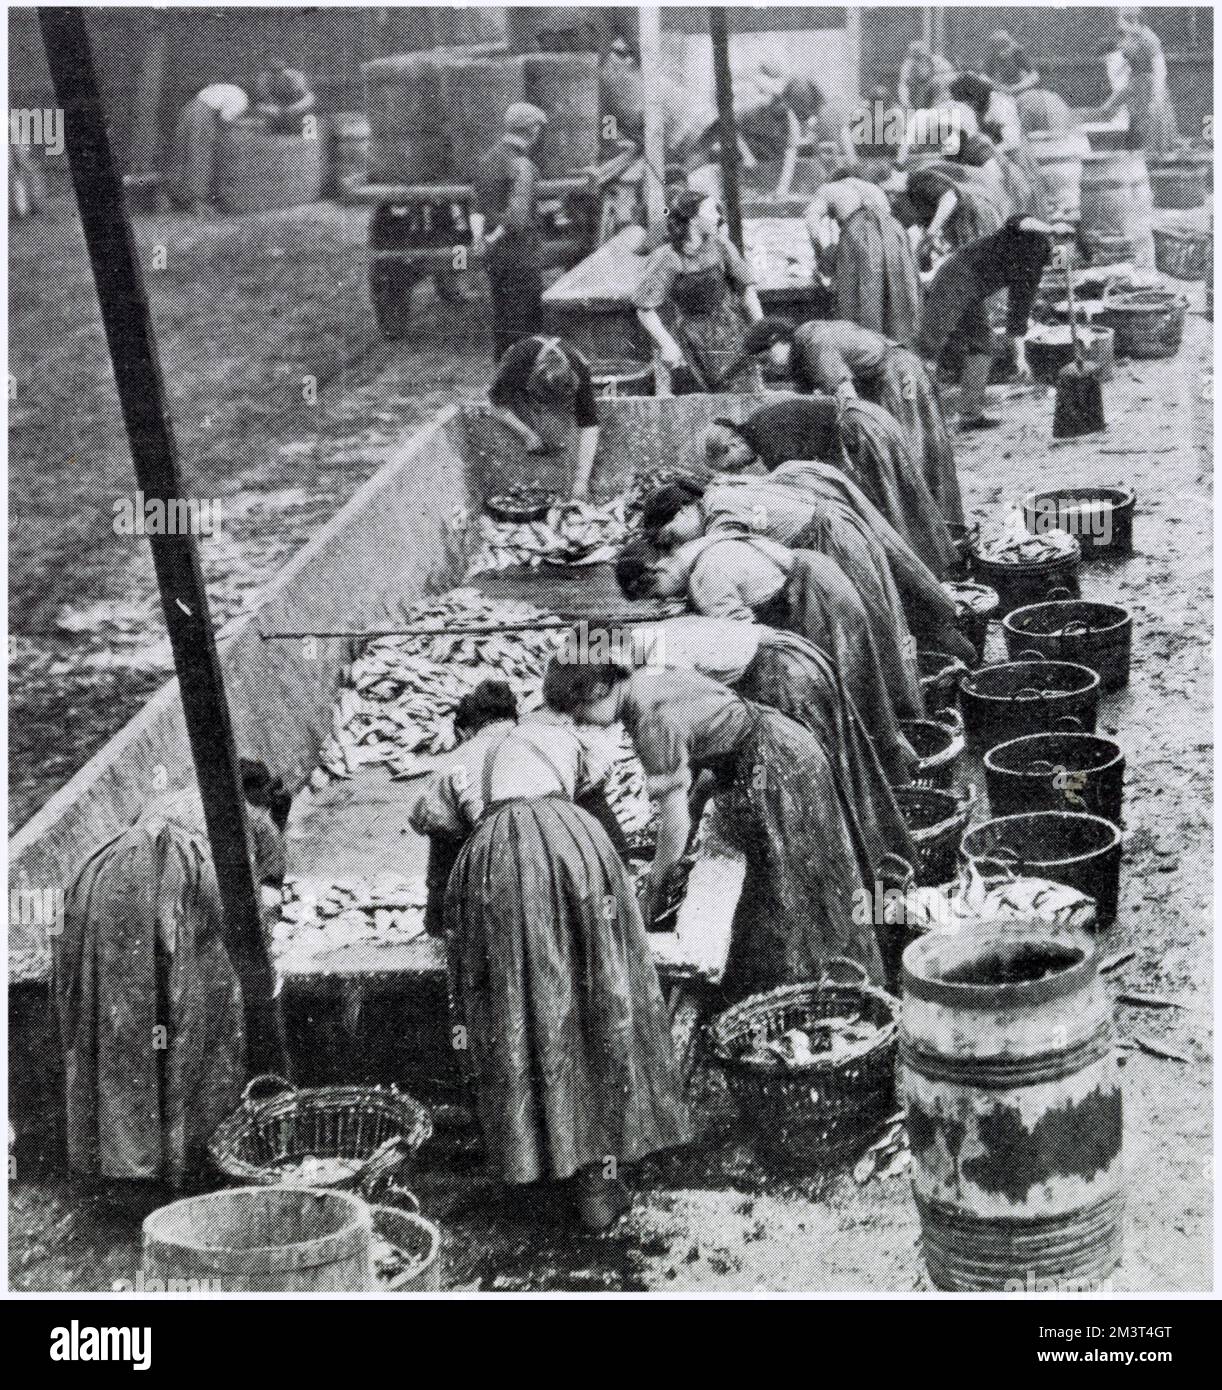 Towns of Yarmouth and Lowesoft in the East Anglian ports were full of women from Scotland, coming down to help with the herring harvest in October and November. Women called 'gutters' working over large open troughs gutting the herring. Stock Photo